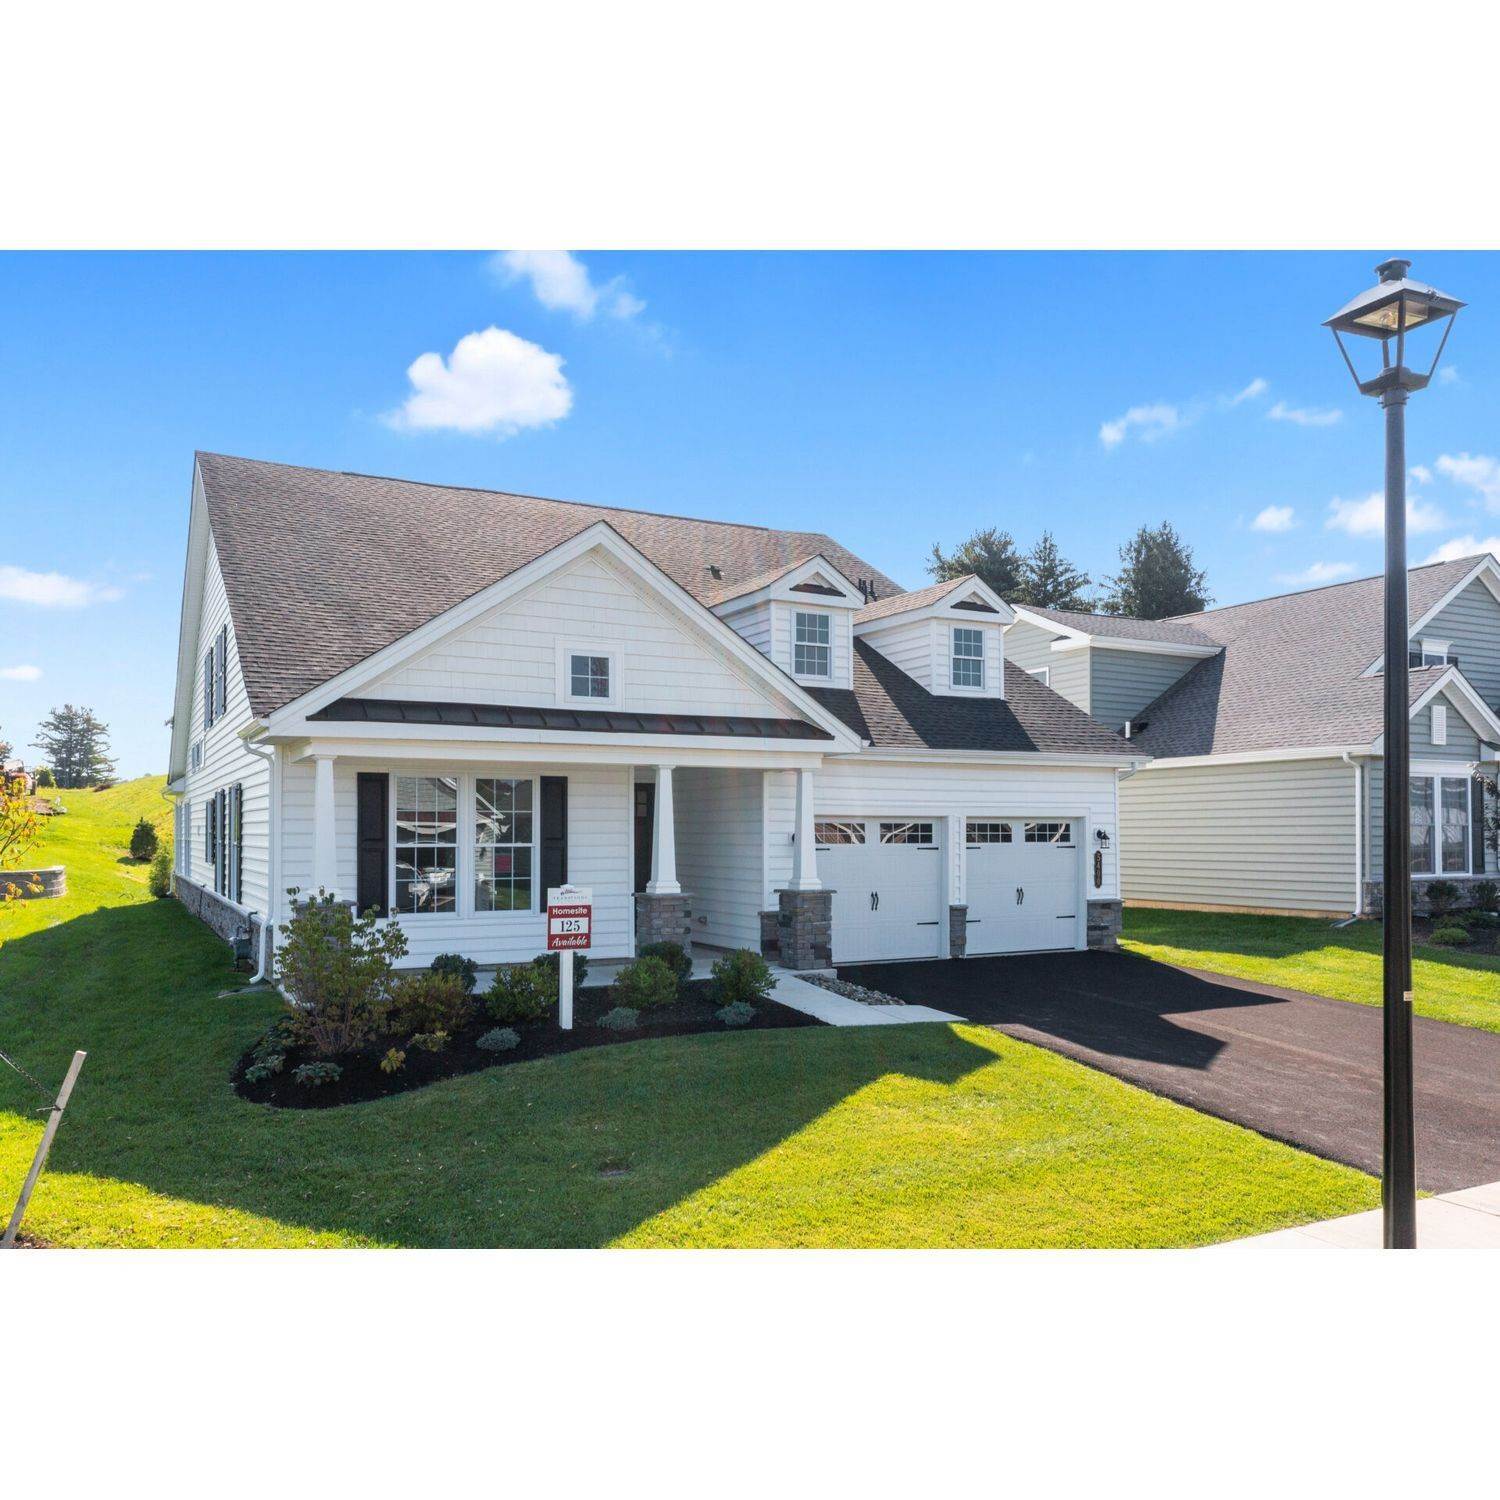 Single Family for Sale at Coopersburg, PA 18036